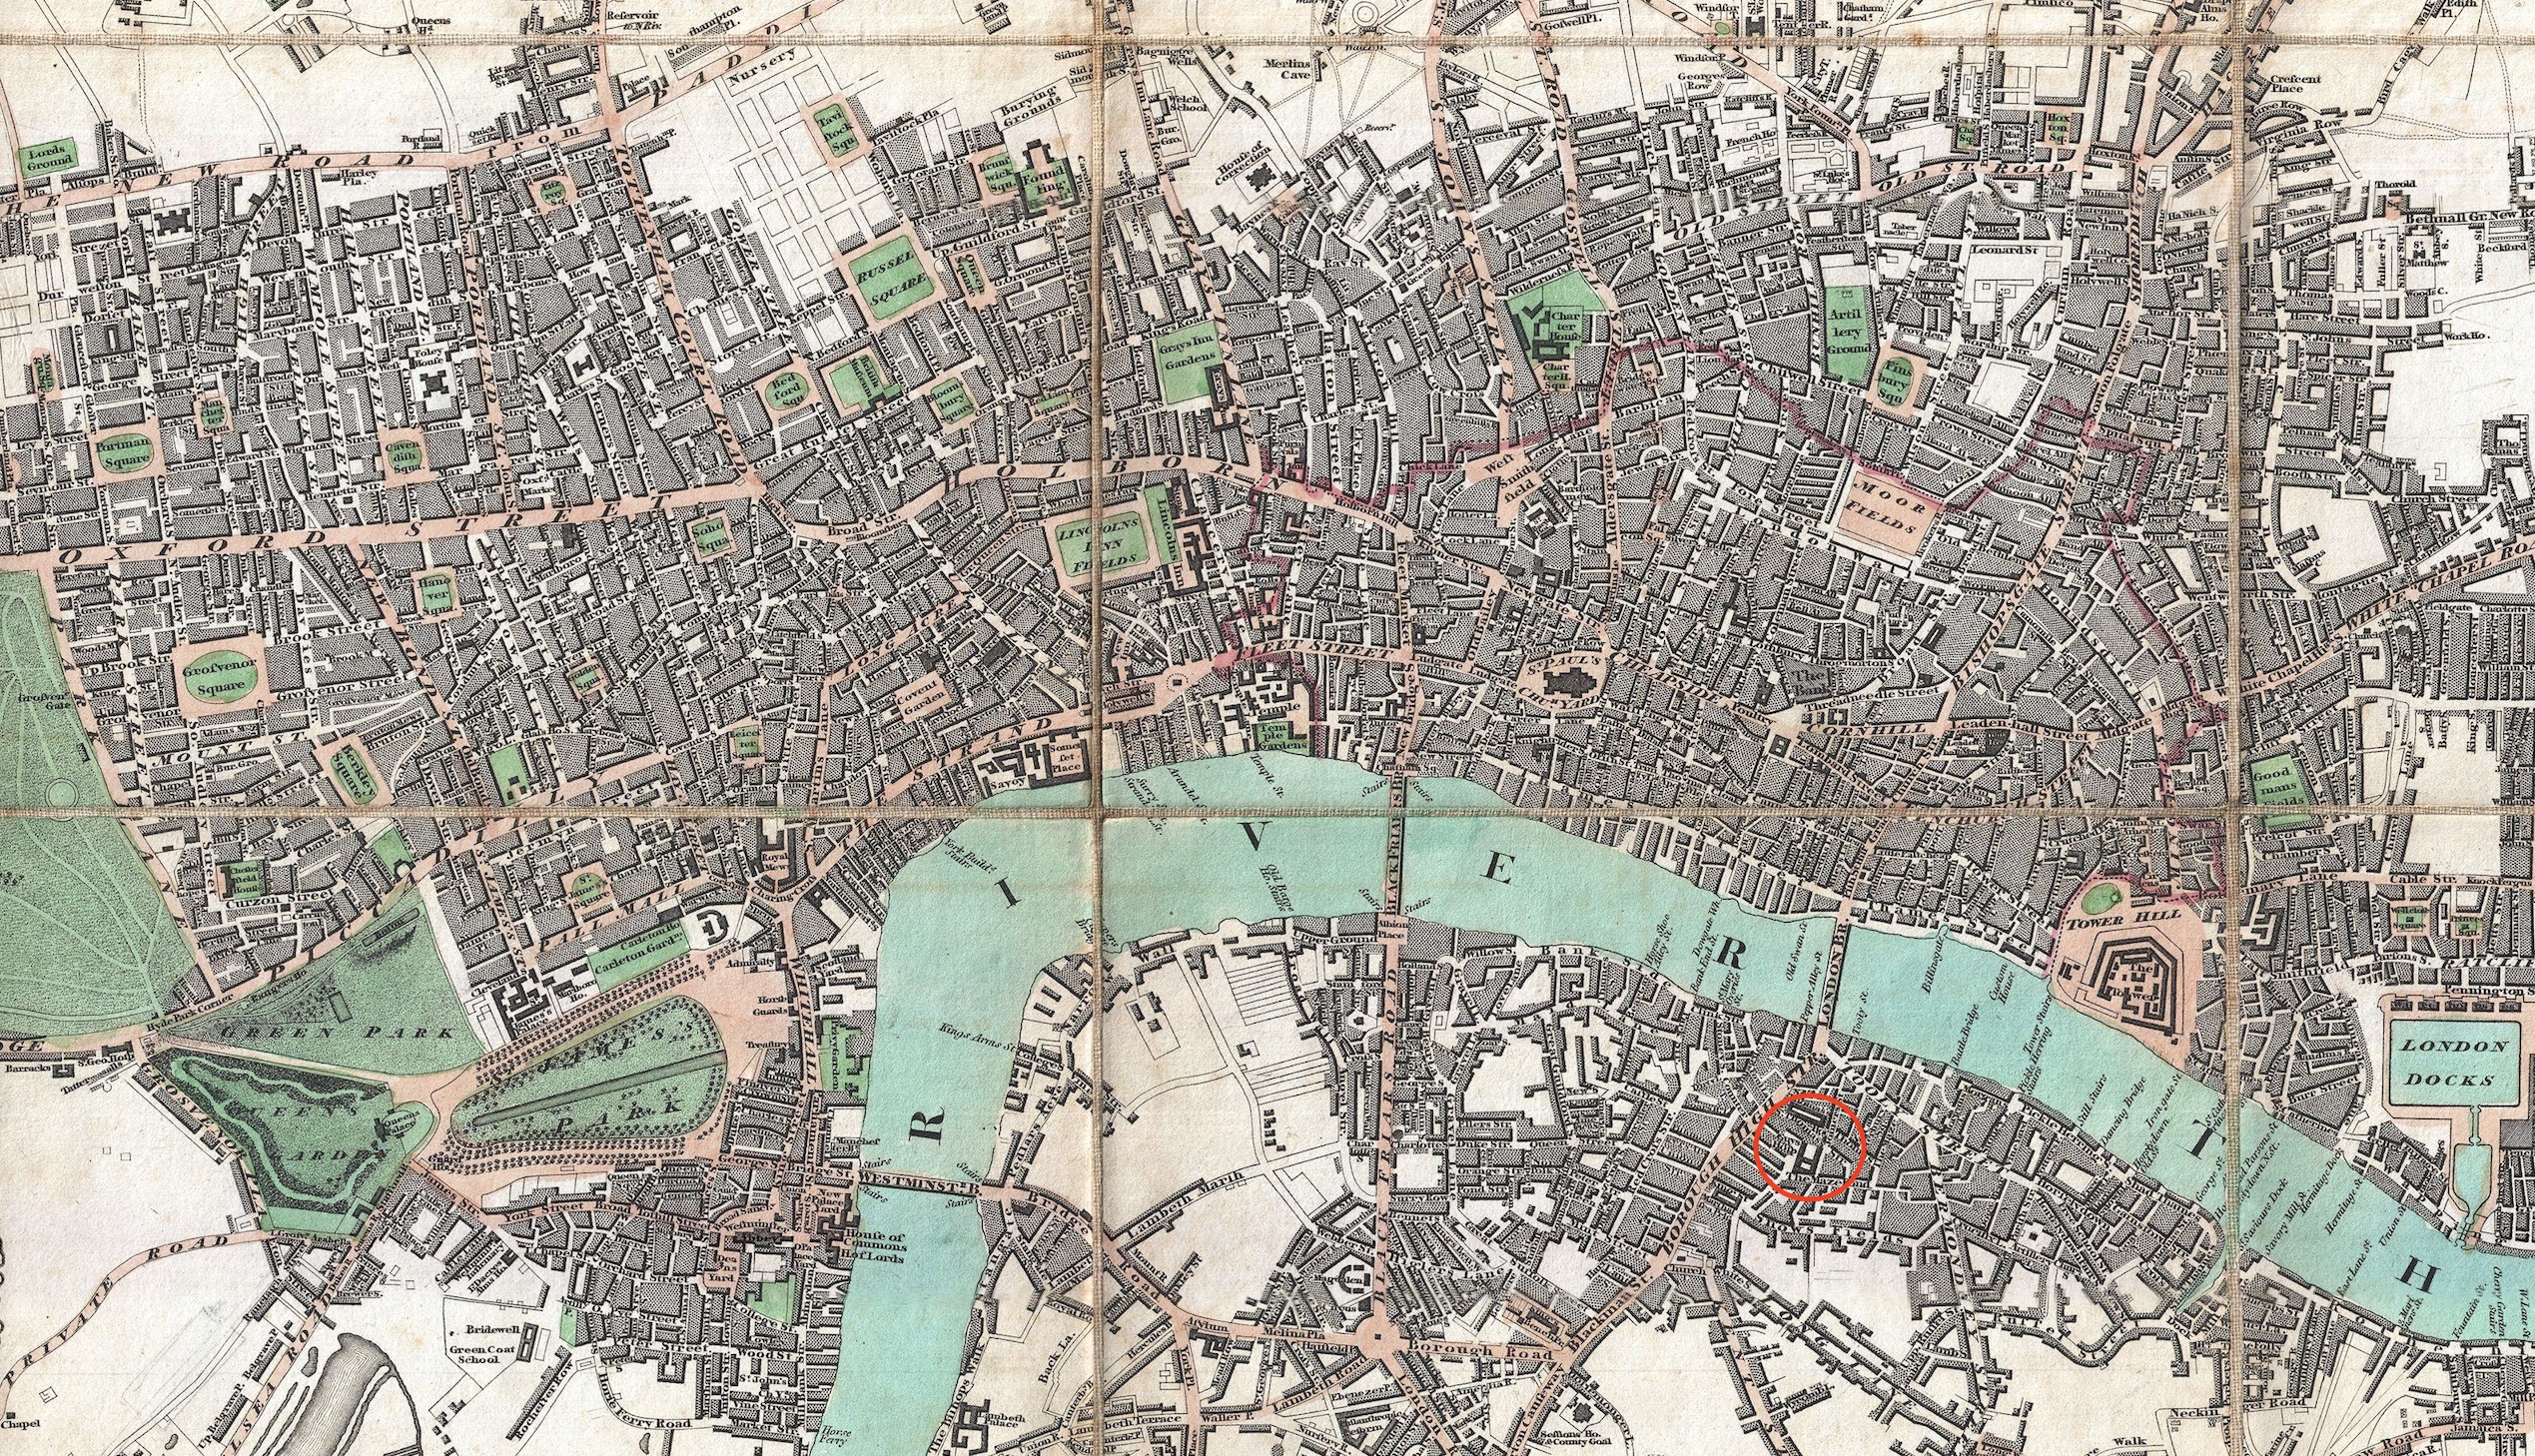 Guyâ€™s Hospital area within the greater London area (Edward Mogg, 1806 map).
        Click to enlarge. 